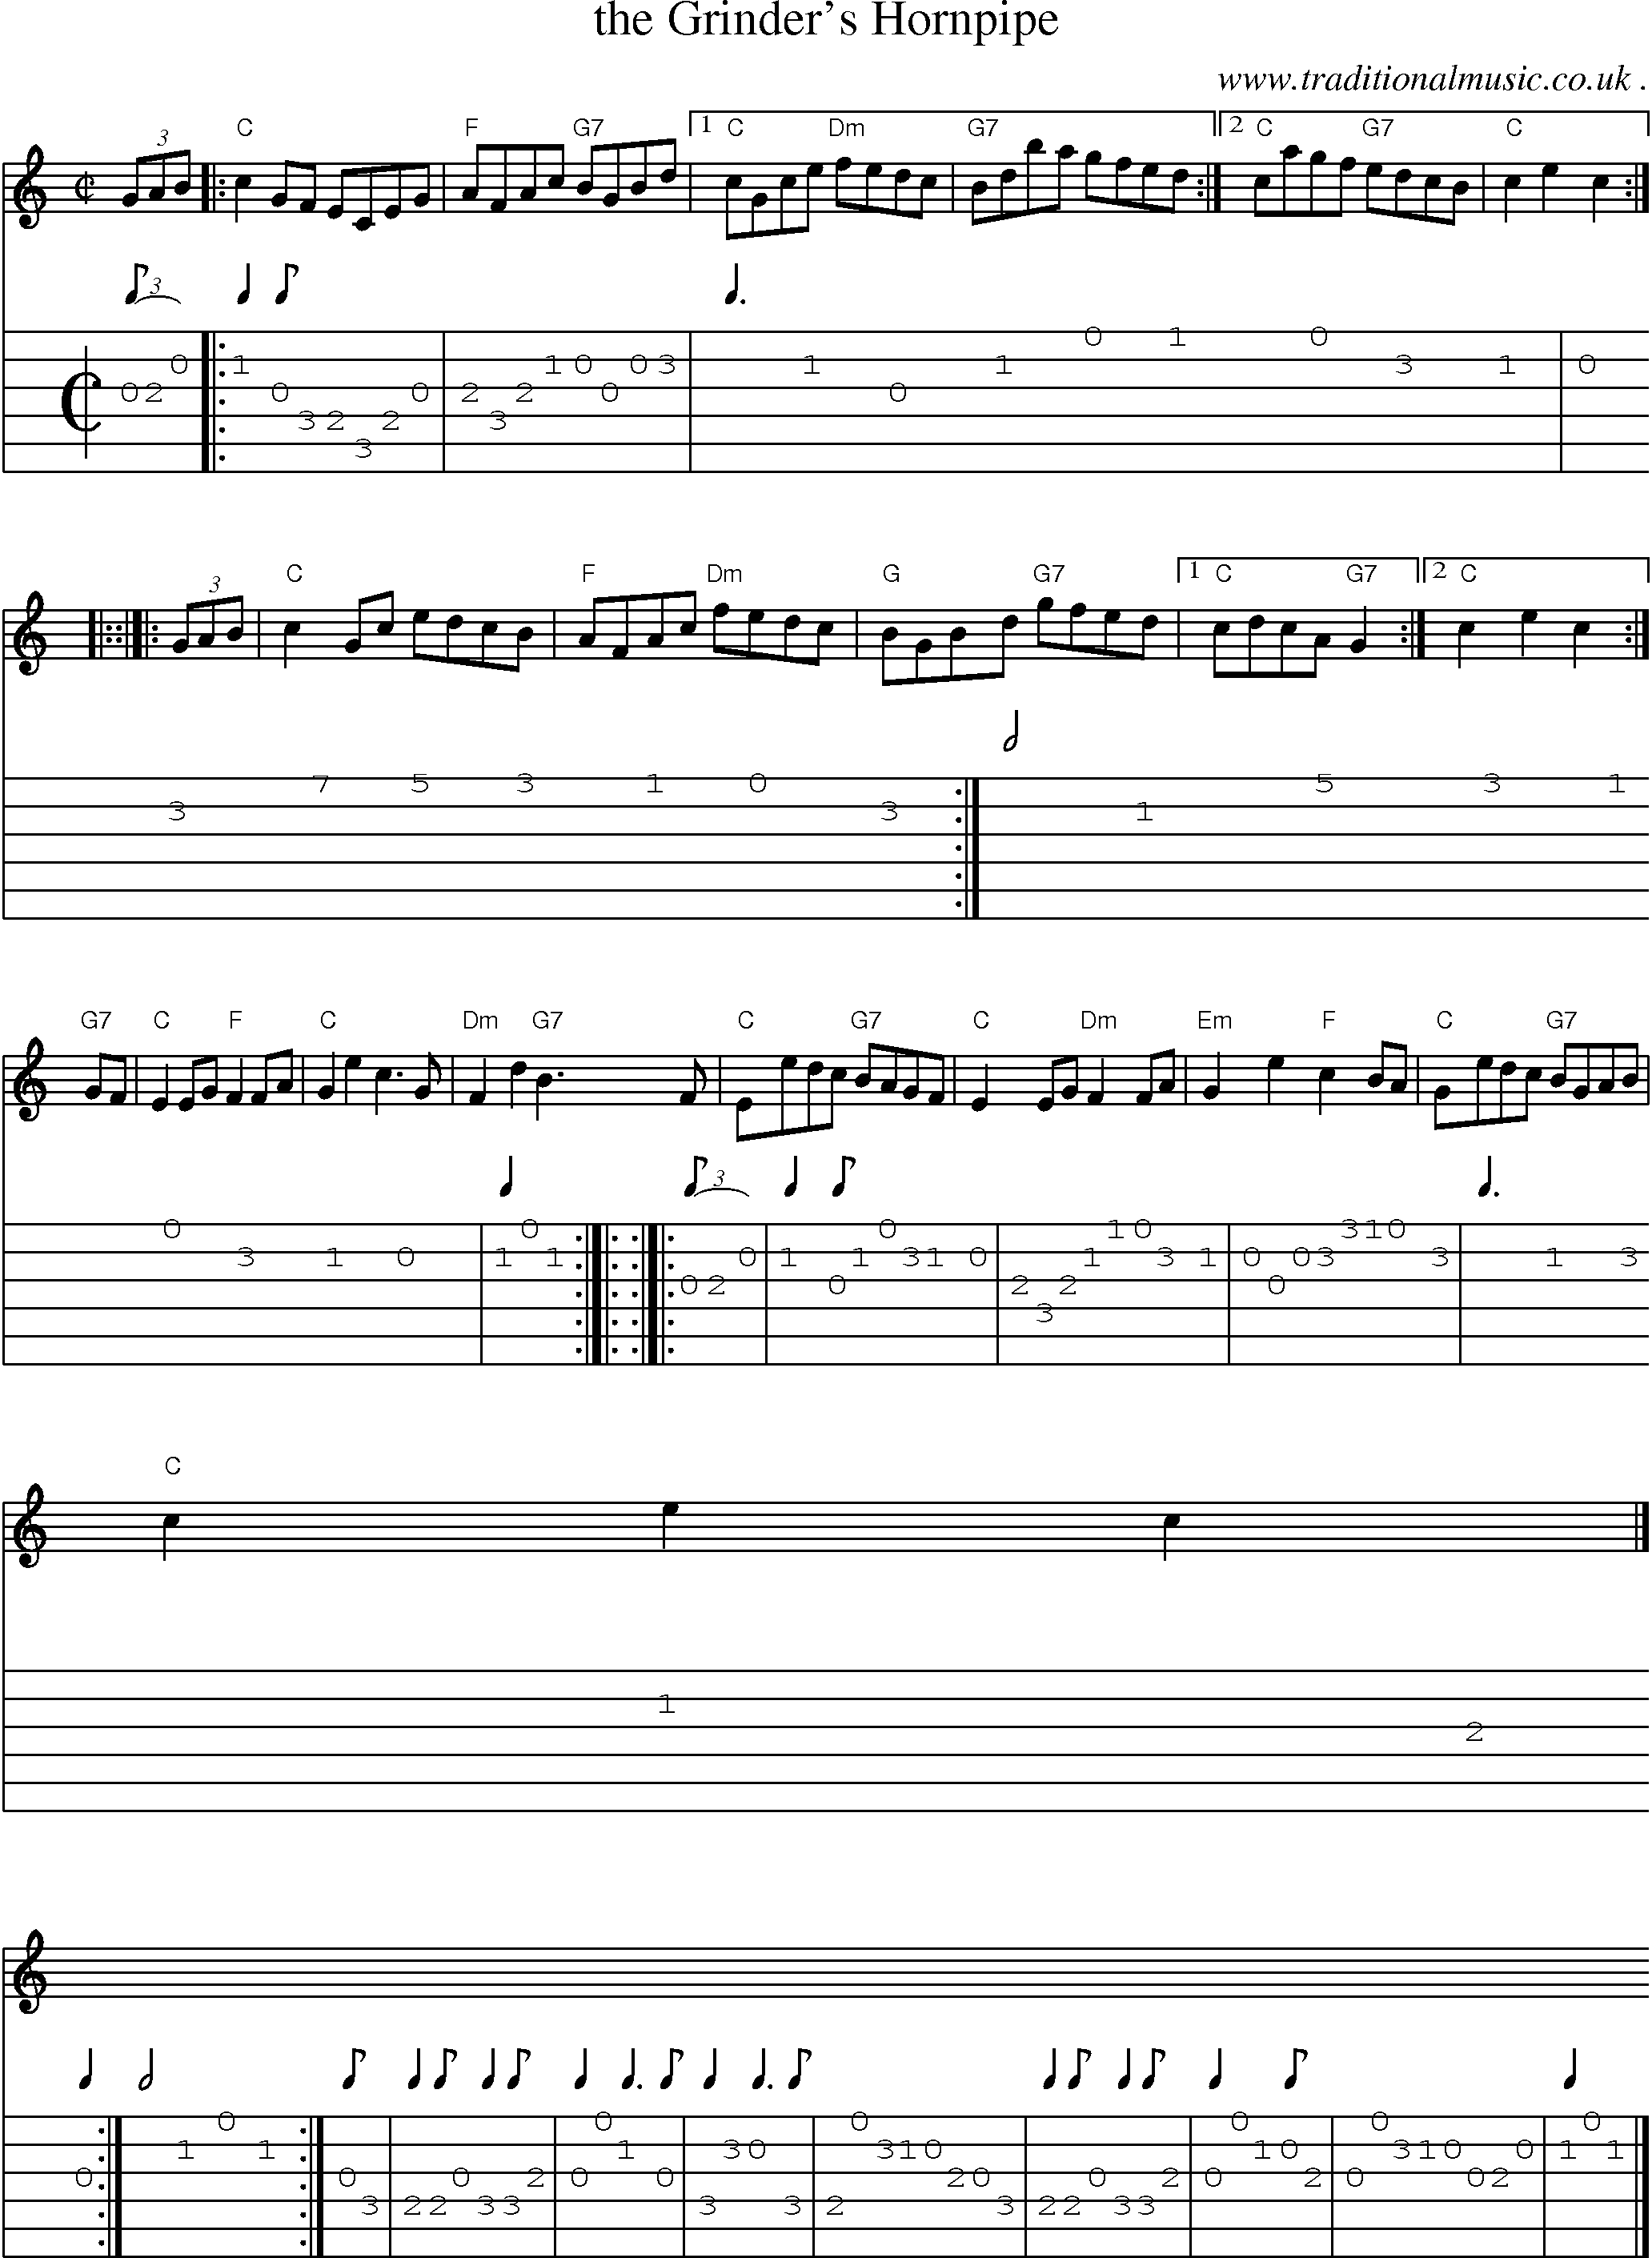 Sheet-music  score, Chords and Guitar Tabs for The Grinders Hornpipe